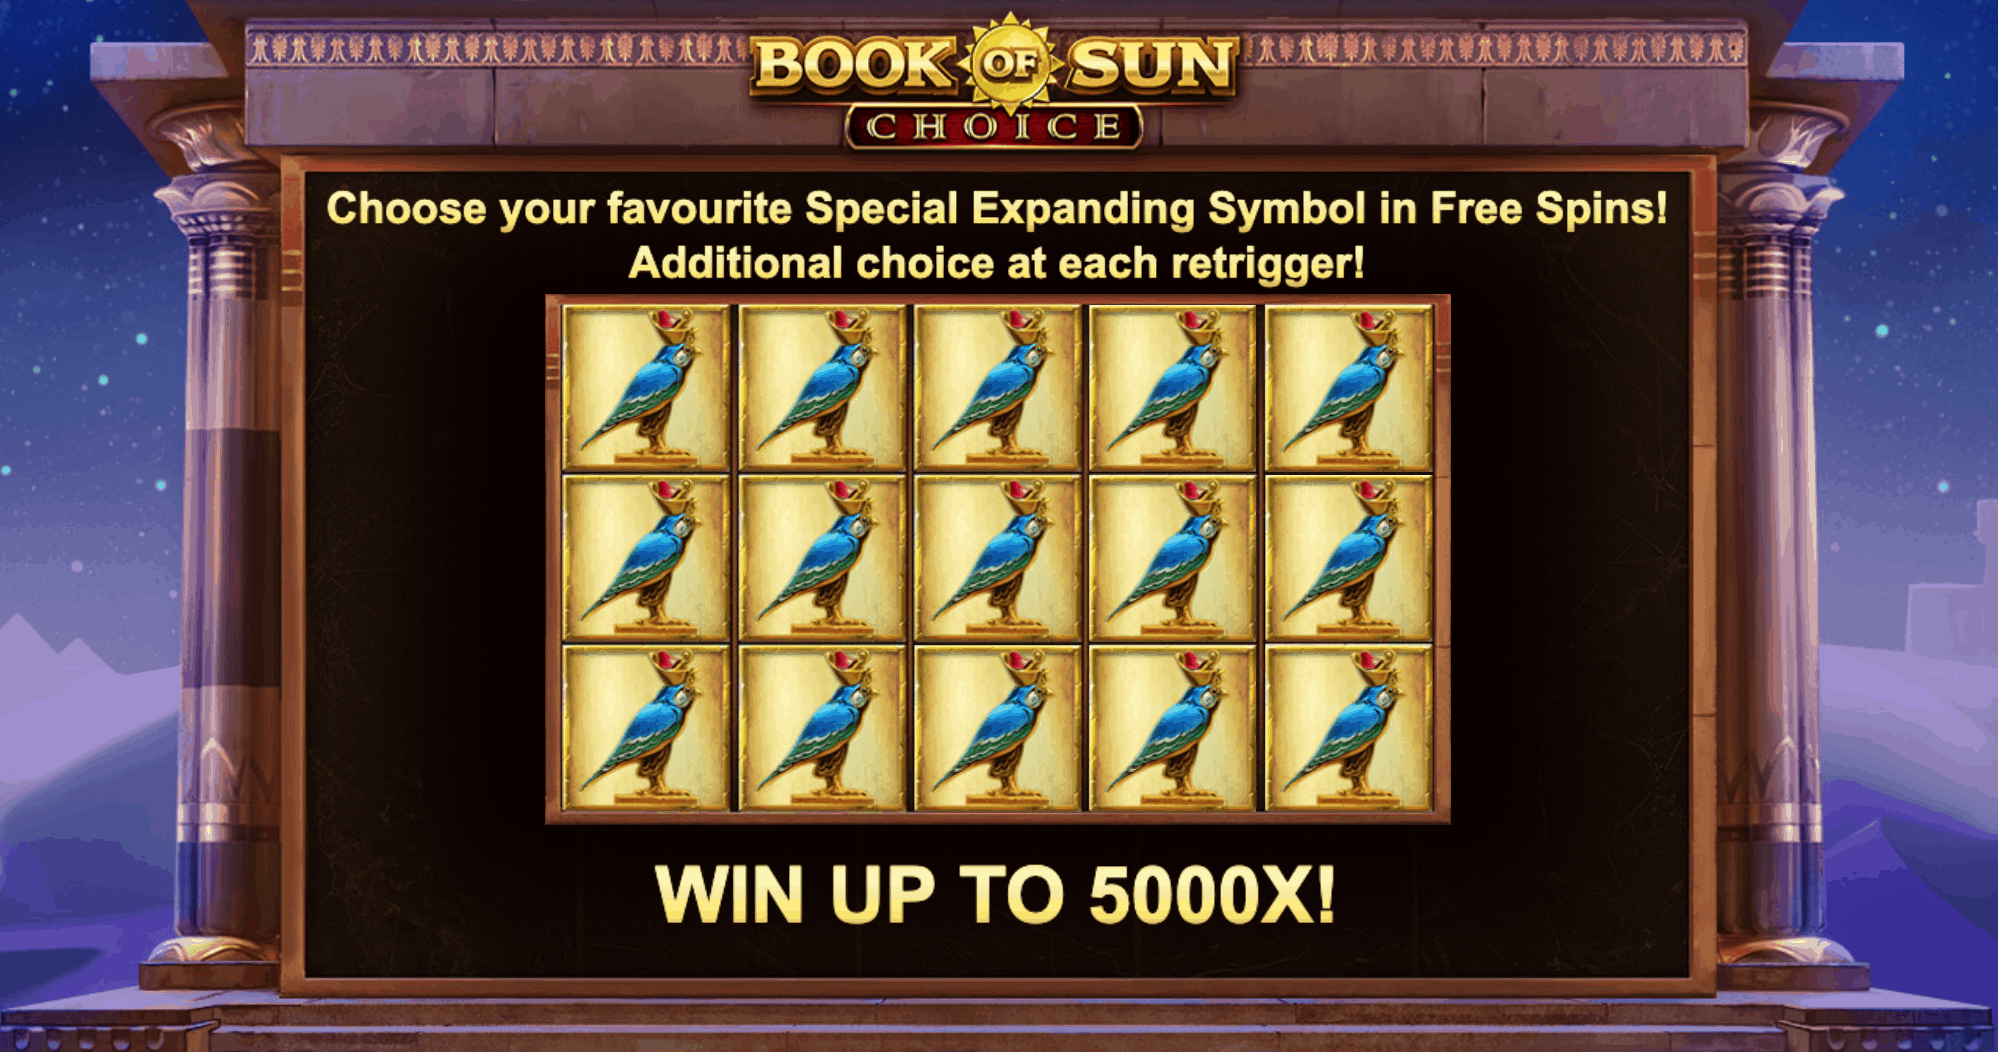 Book-of-Sun-Choice-Free-spins-4